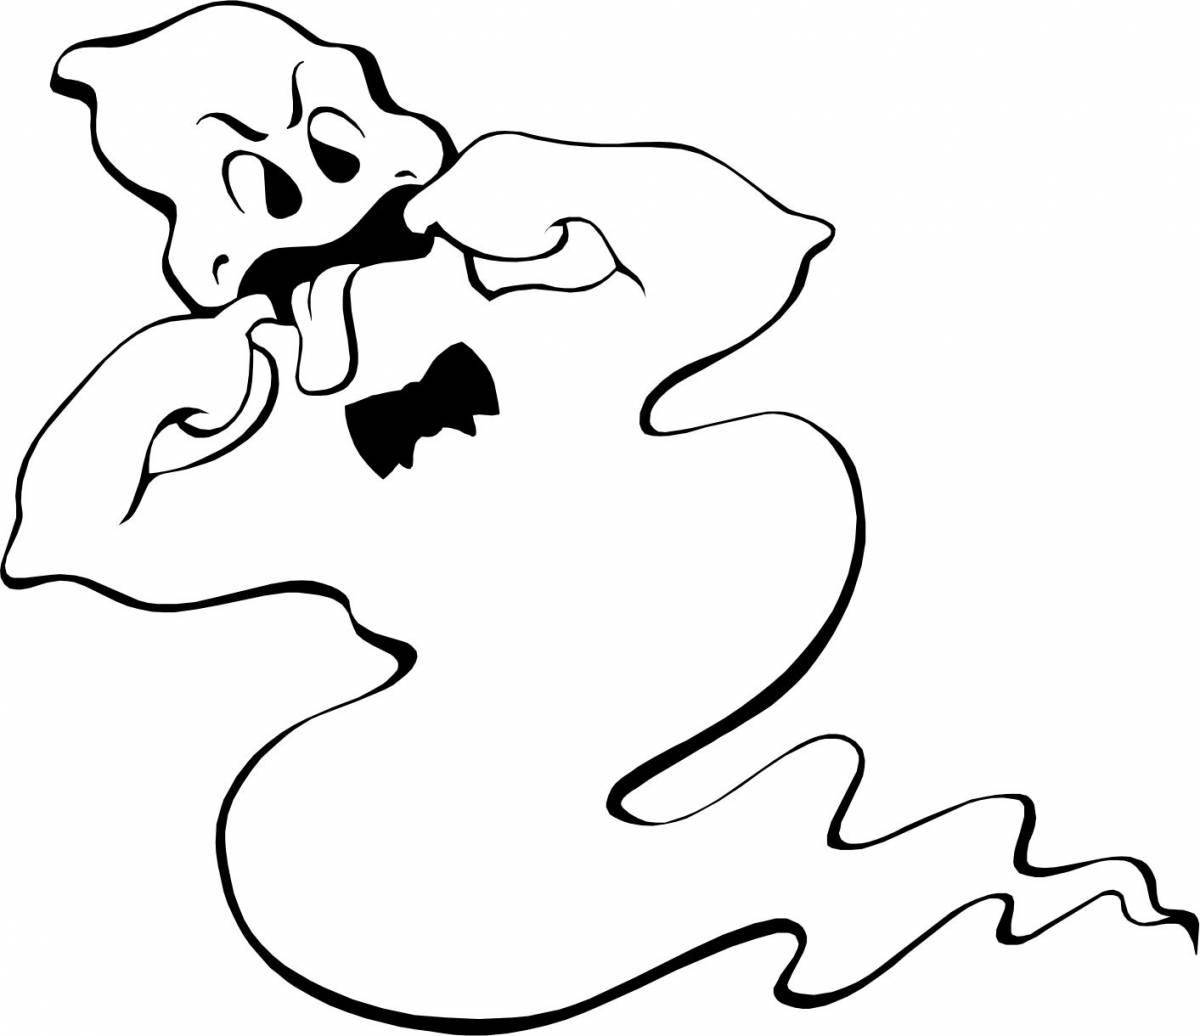 Fancy coloring ghost for kids